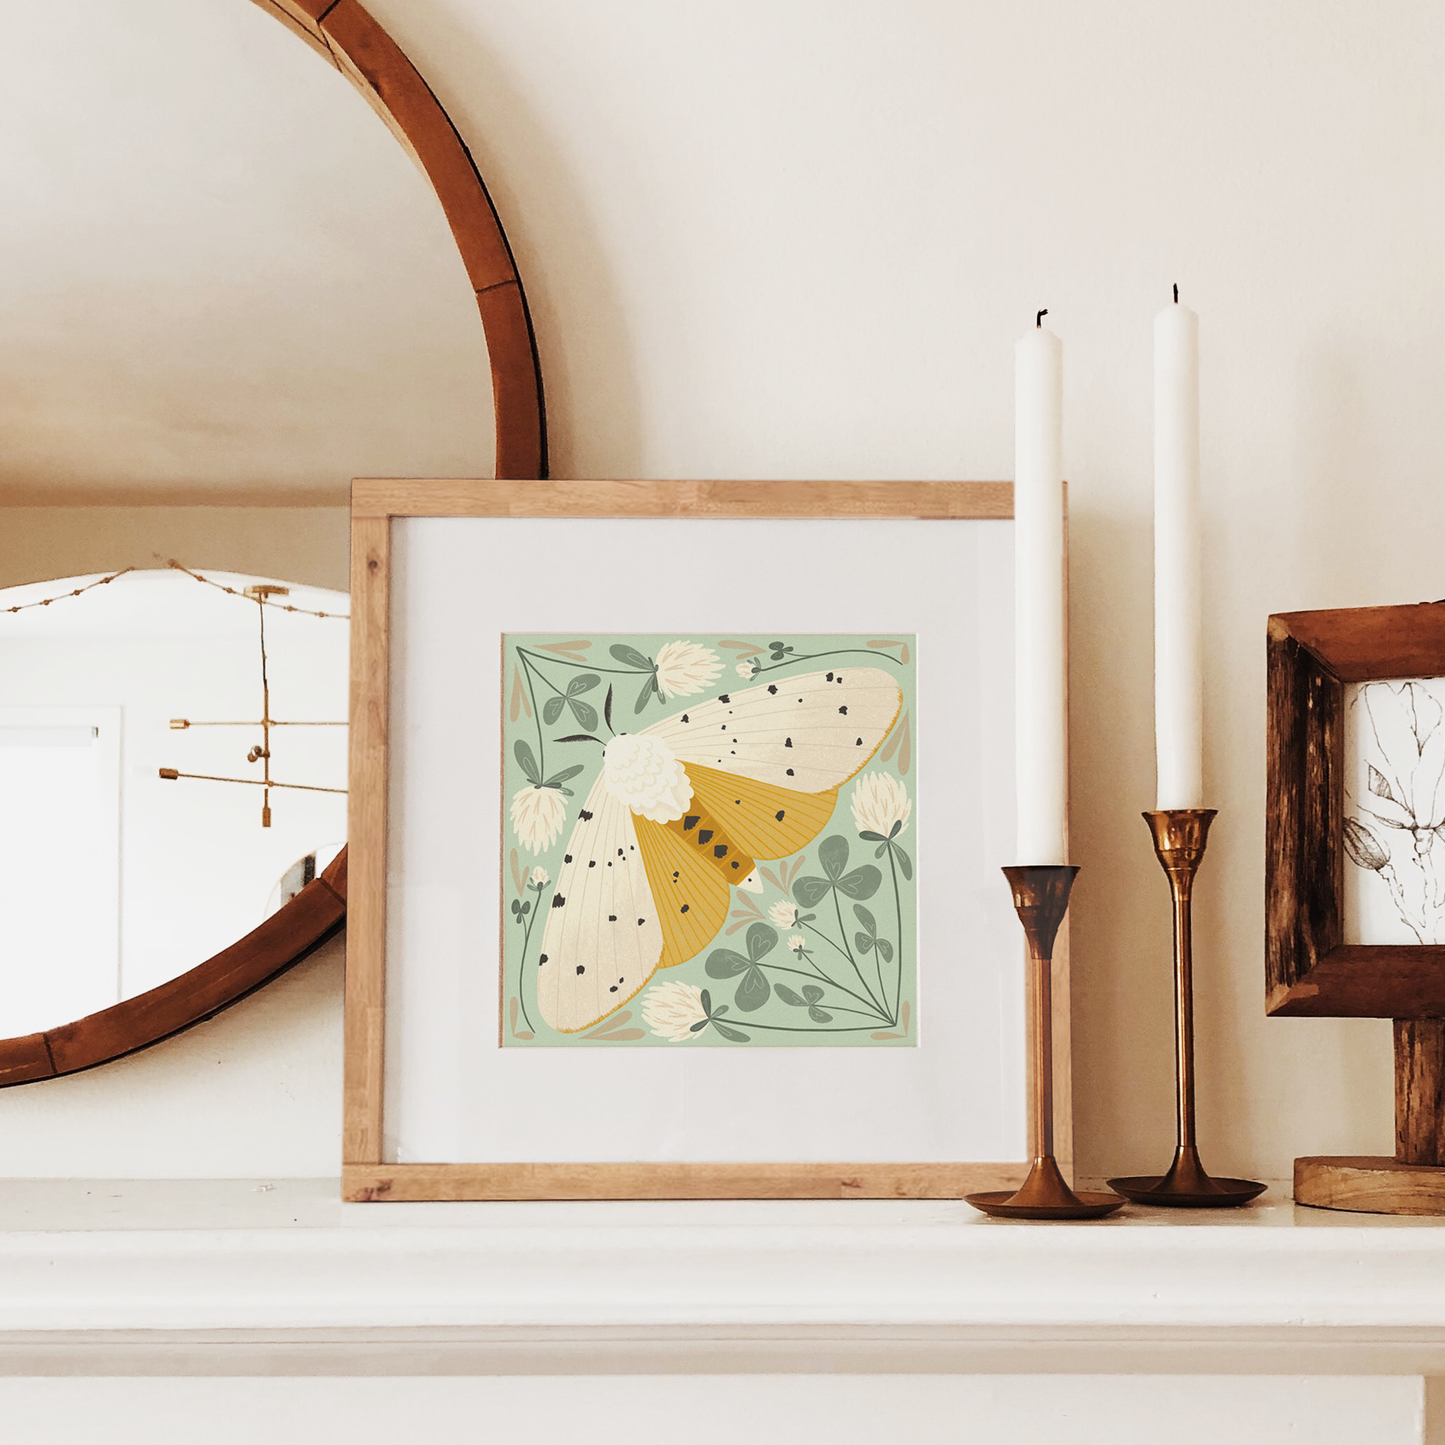 art print showing a salt marsh moth in black, white and mustard yellow, surrounded by whimsical mint green clovers and white clover flowers. shown displayed in a wood frame, resting on a mantle.